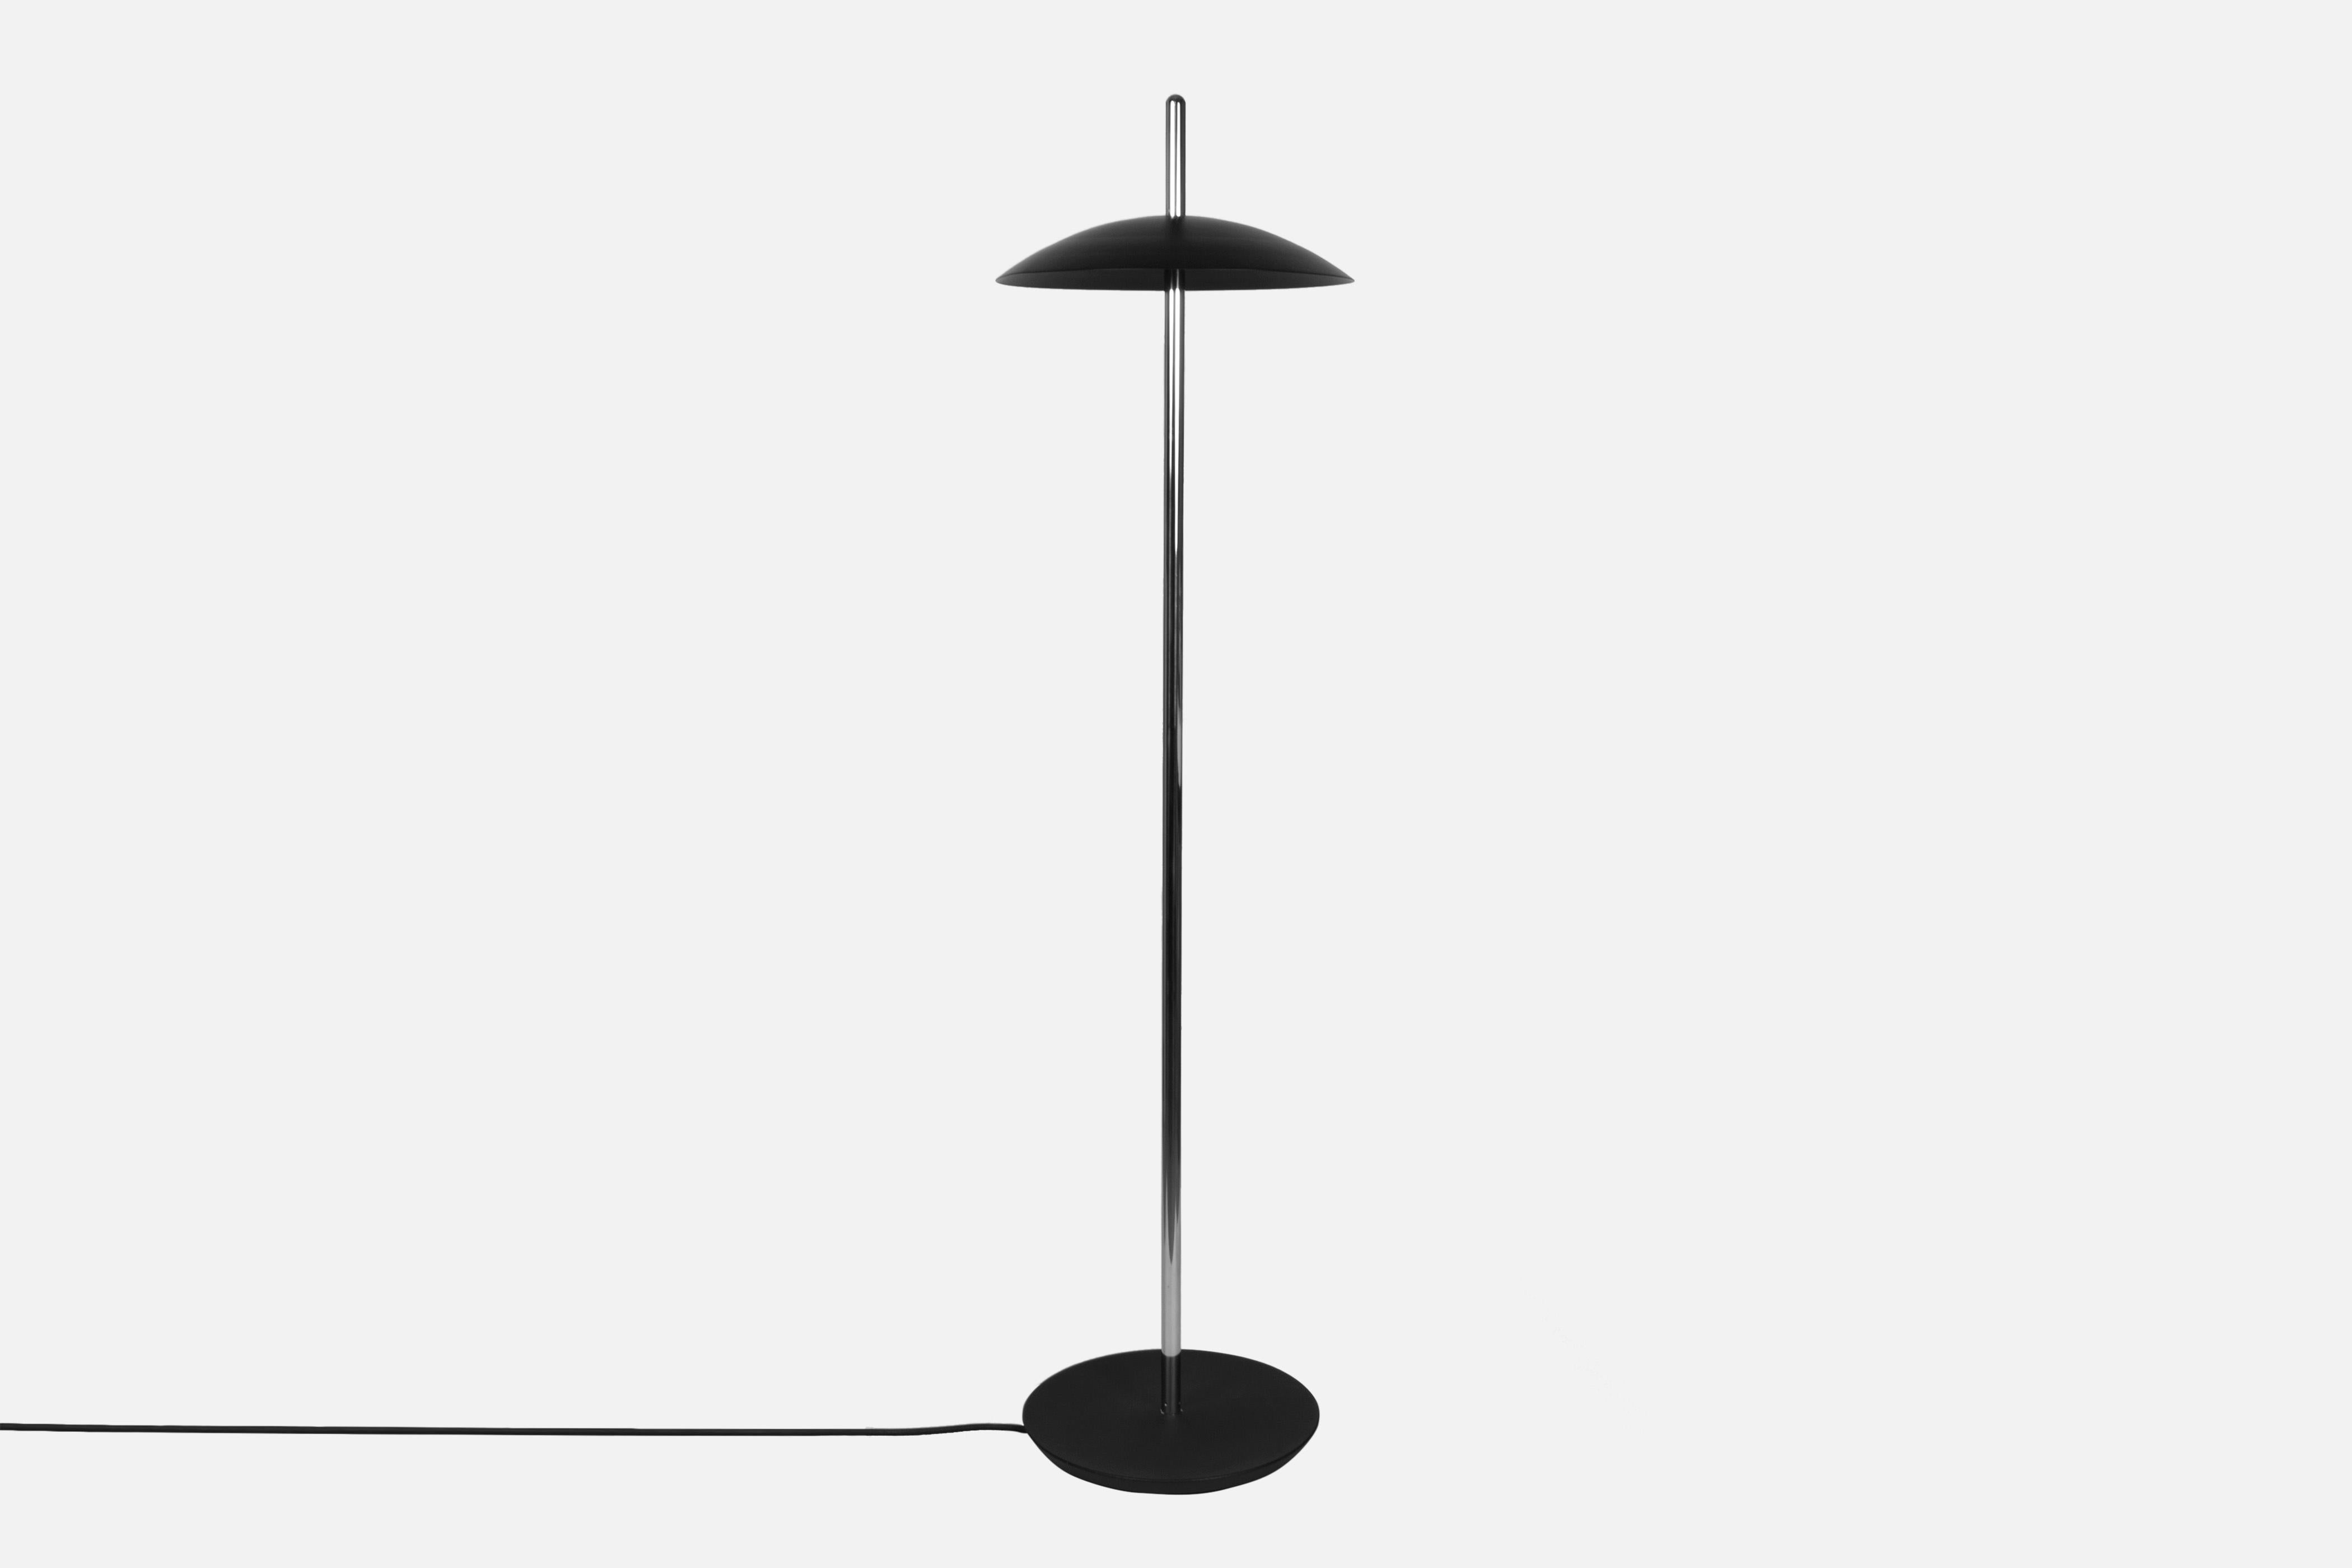 A clear distillation of line weight, the signal floor lamp stands effortlessly in virtually any setting. From a cast iron base a polished stem rises to intersect its spun aluminum shade which houses warm LEDs. Both modern and minimal, the signal